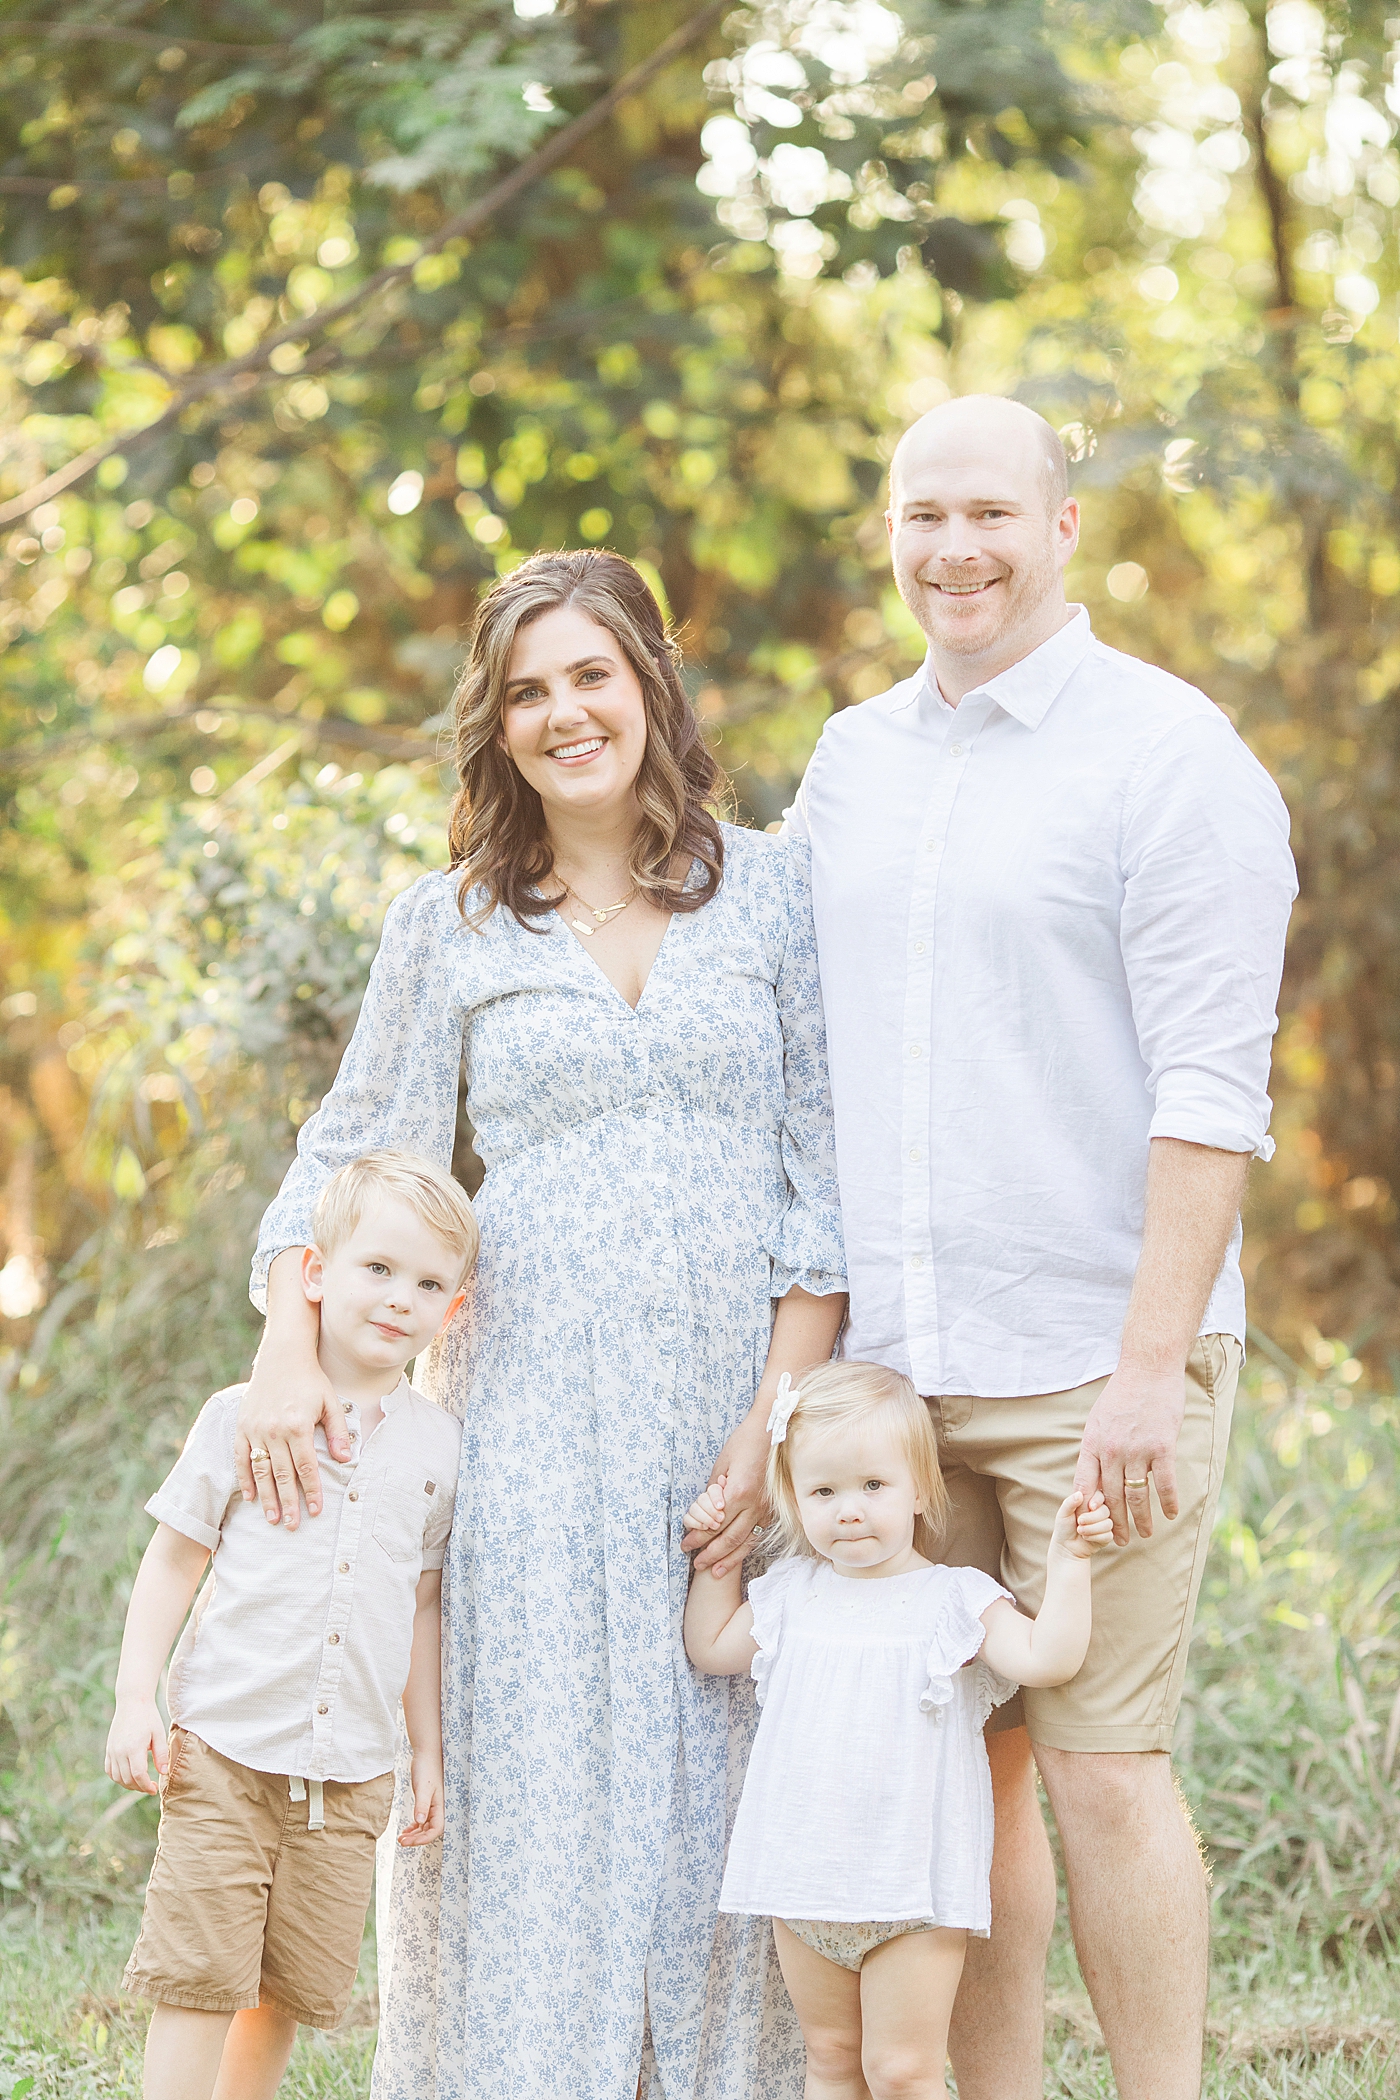 Outdoor family session at sunset in Houston. Photo by Fresh Light Photography.